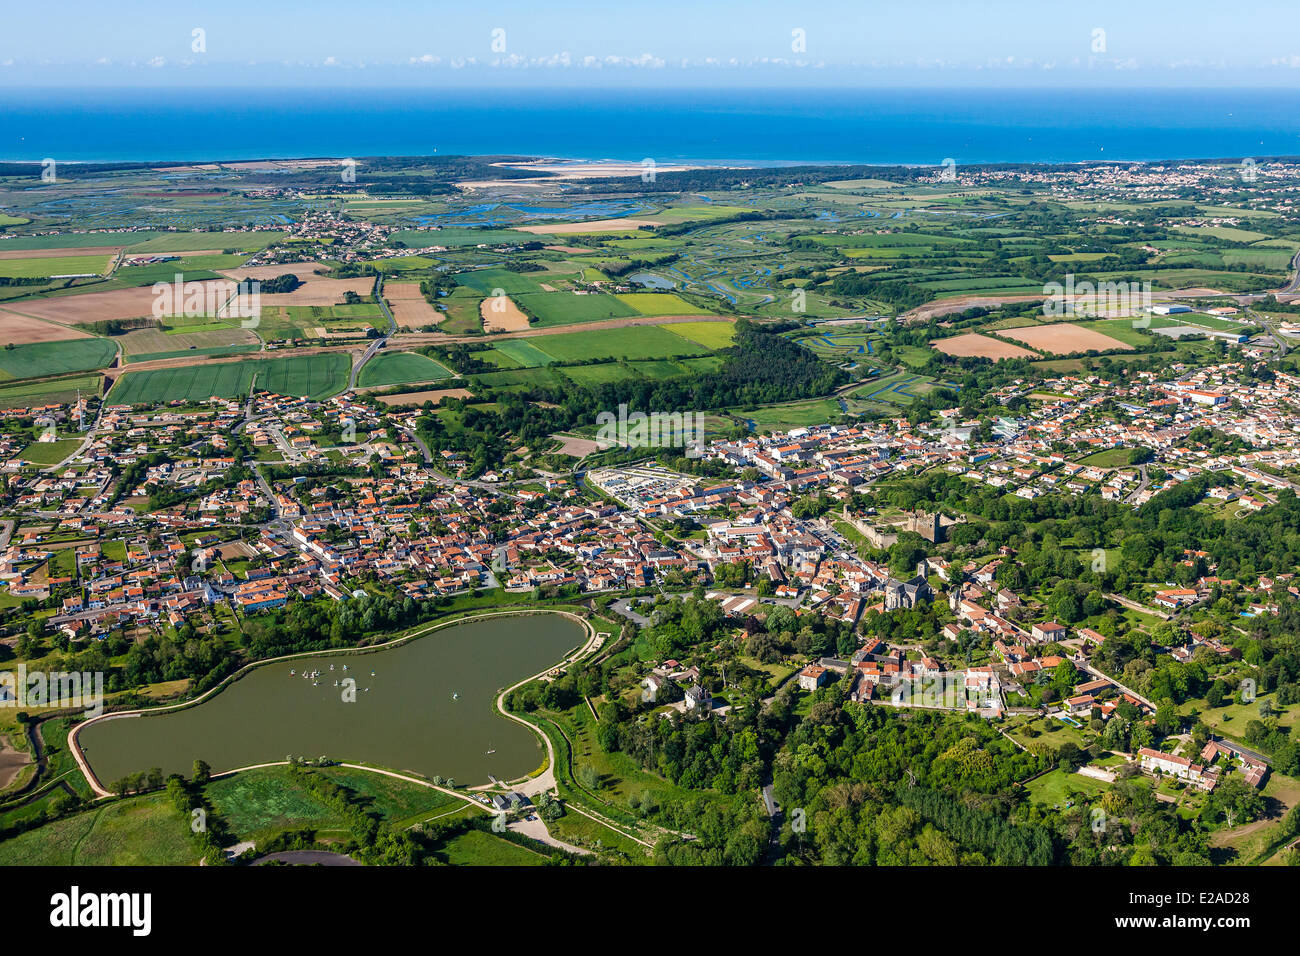 France, Vendee, Talmont Saint Hilaire (aerial view) Stock Photo